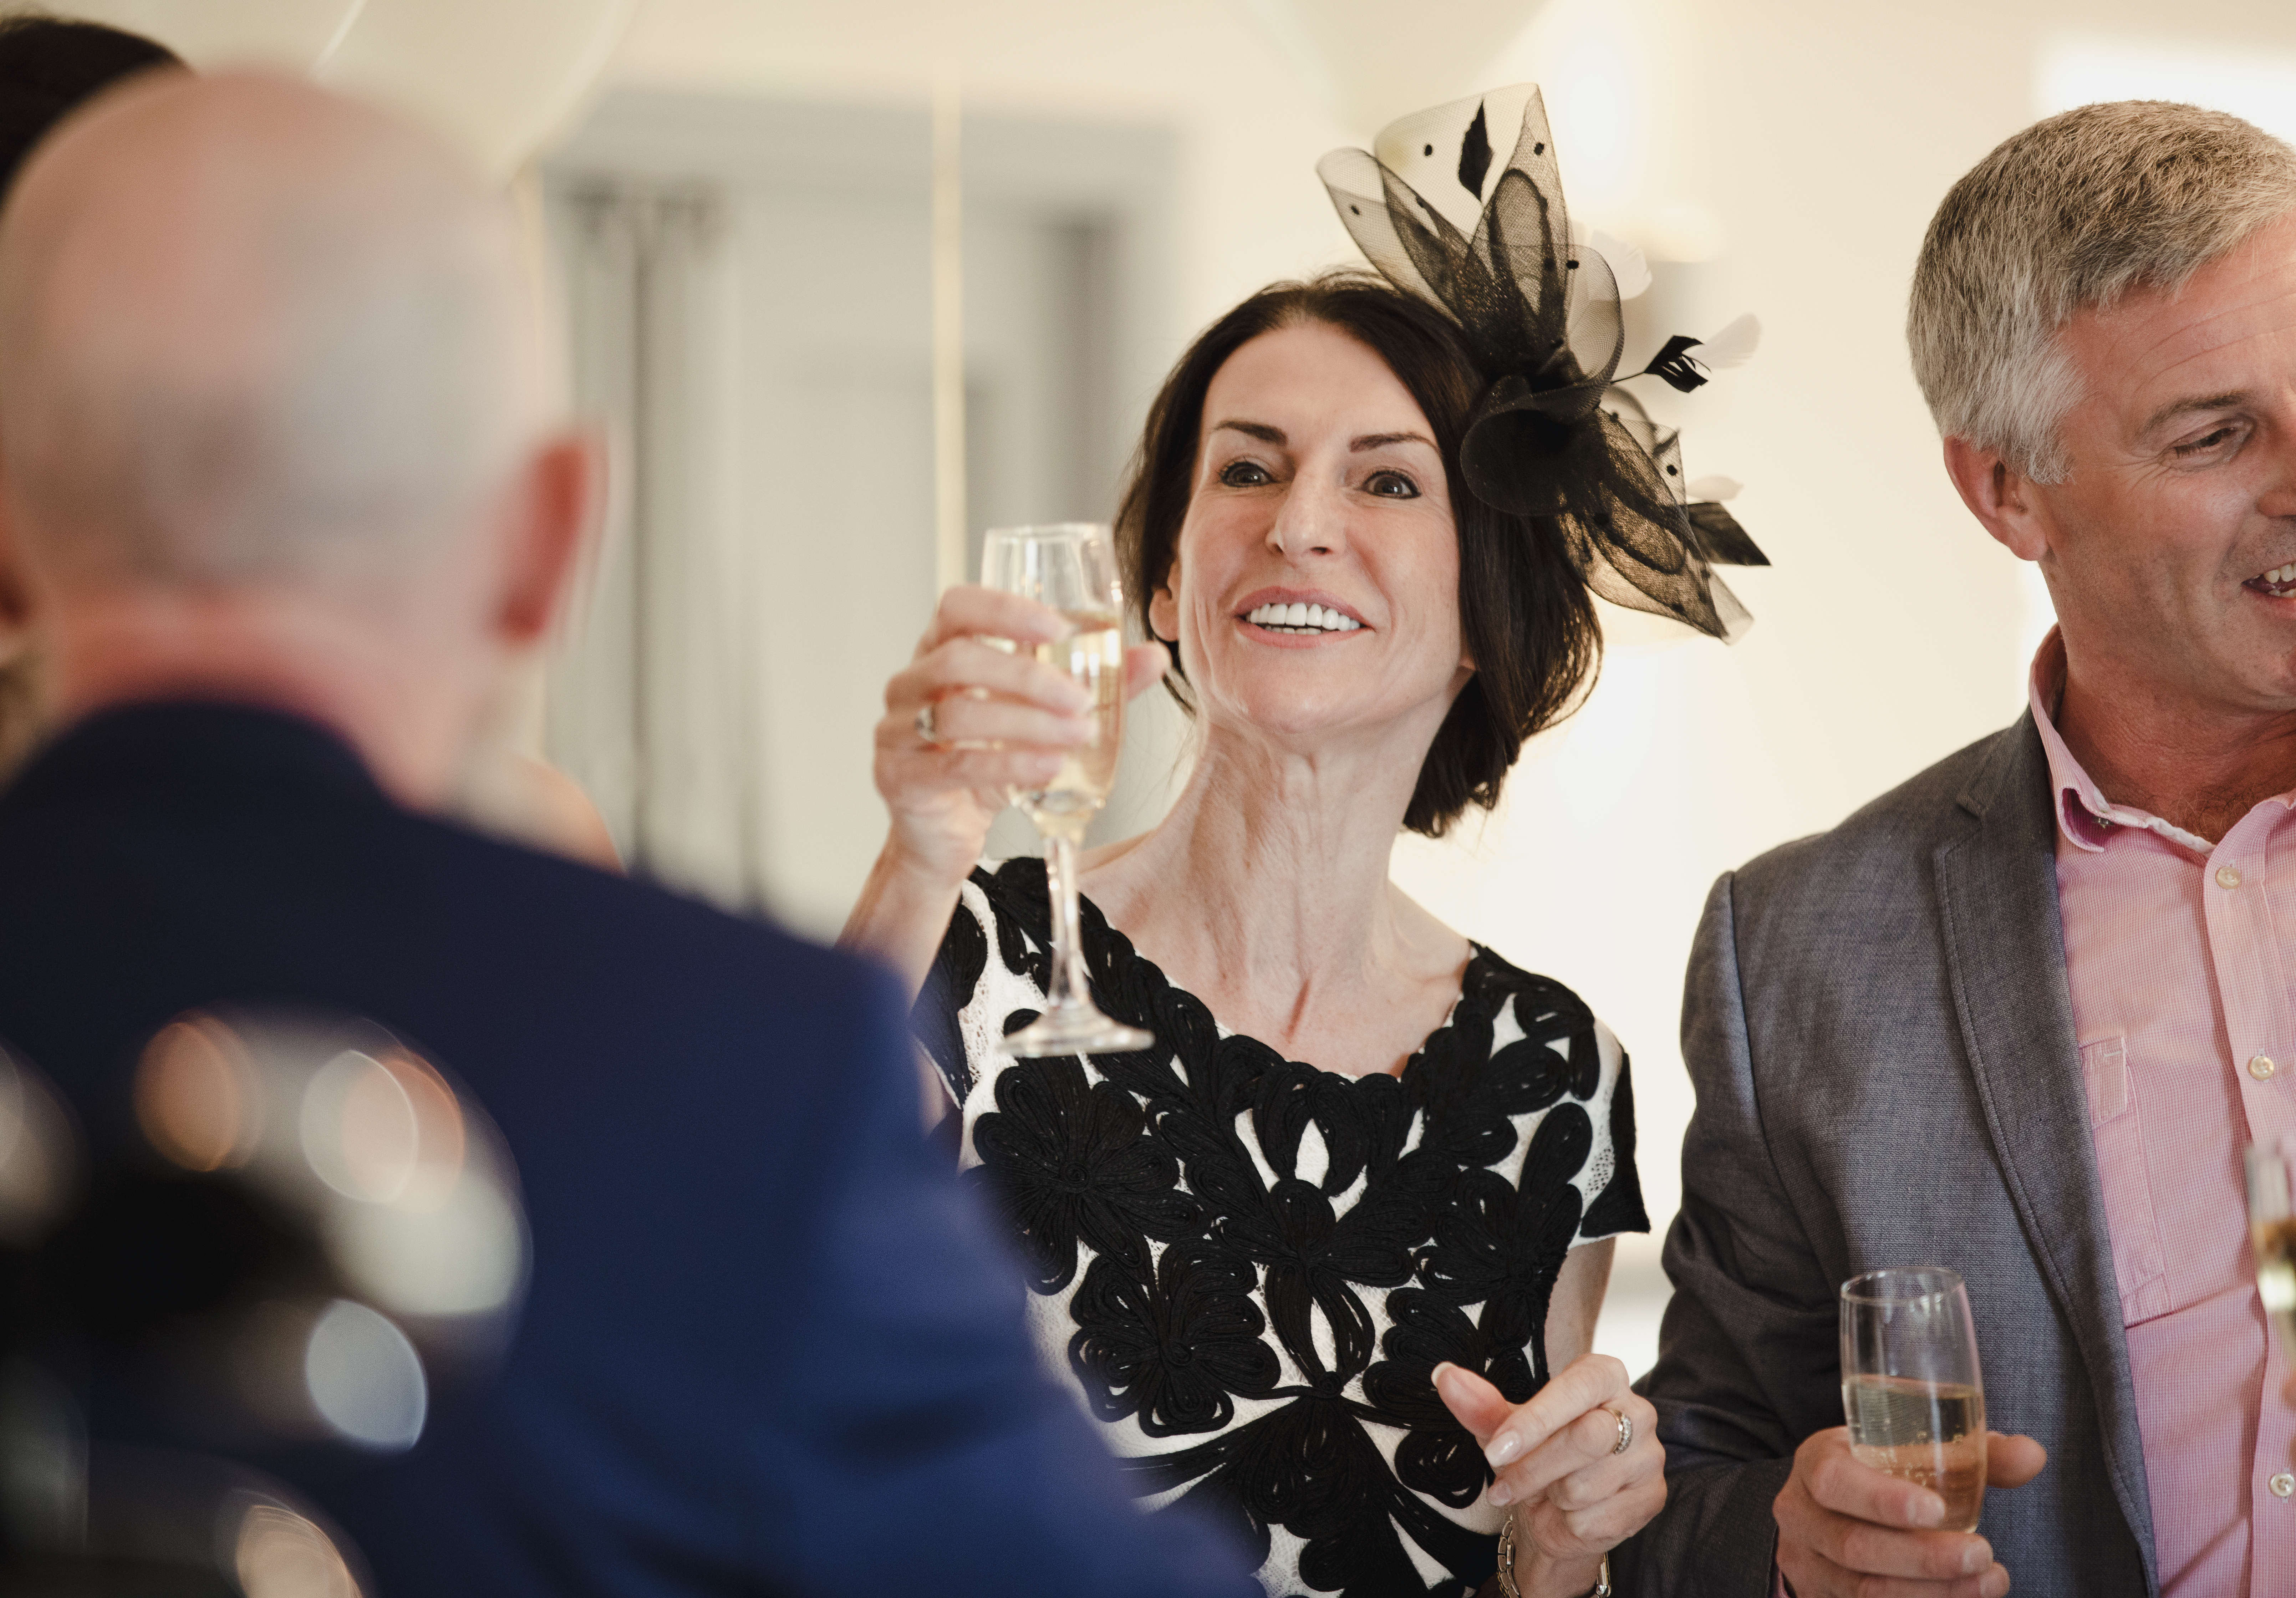 A woman shares a toast at a wedding | Source: Shutterstock